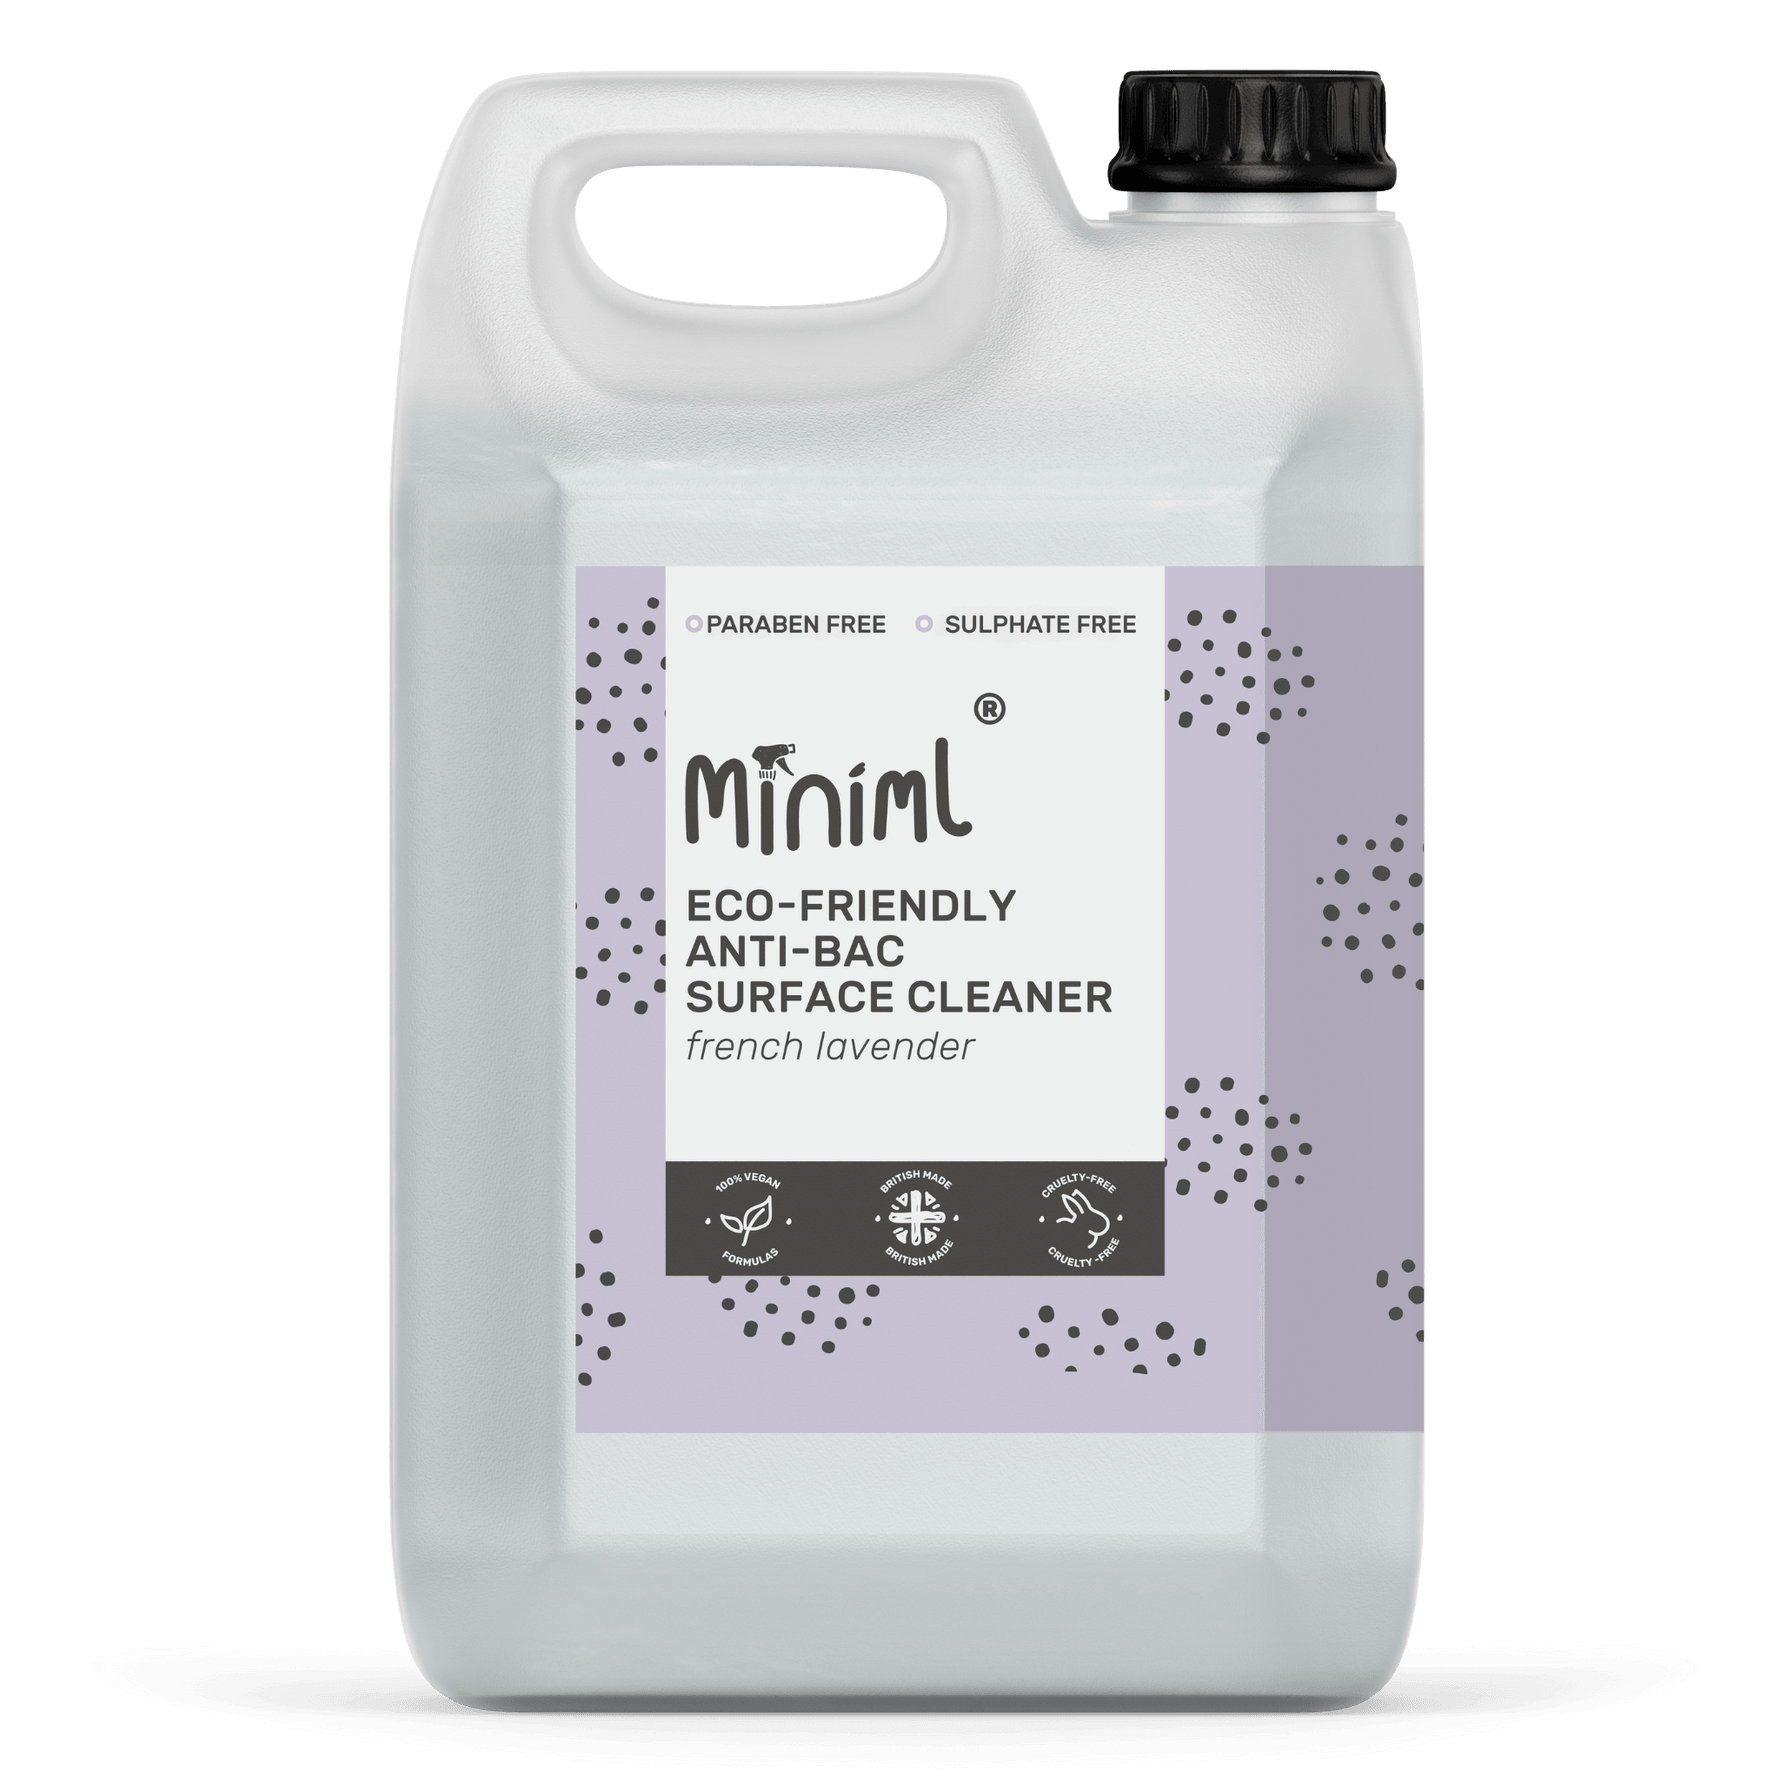 Miniml - Eco Friendly - Anti-Bac Surface Cleaner - French Lavender - 5 Litre - Vending Superstore